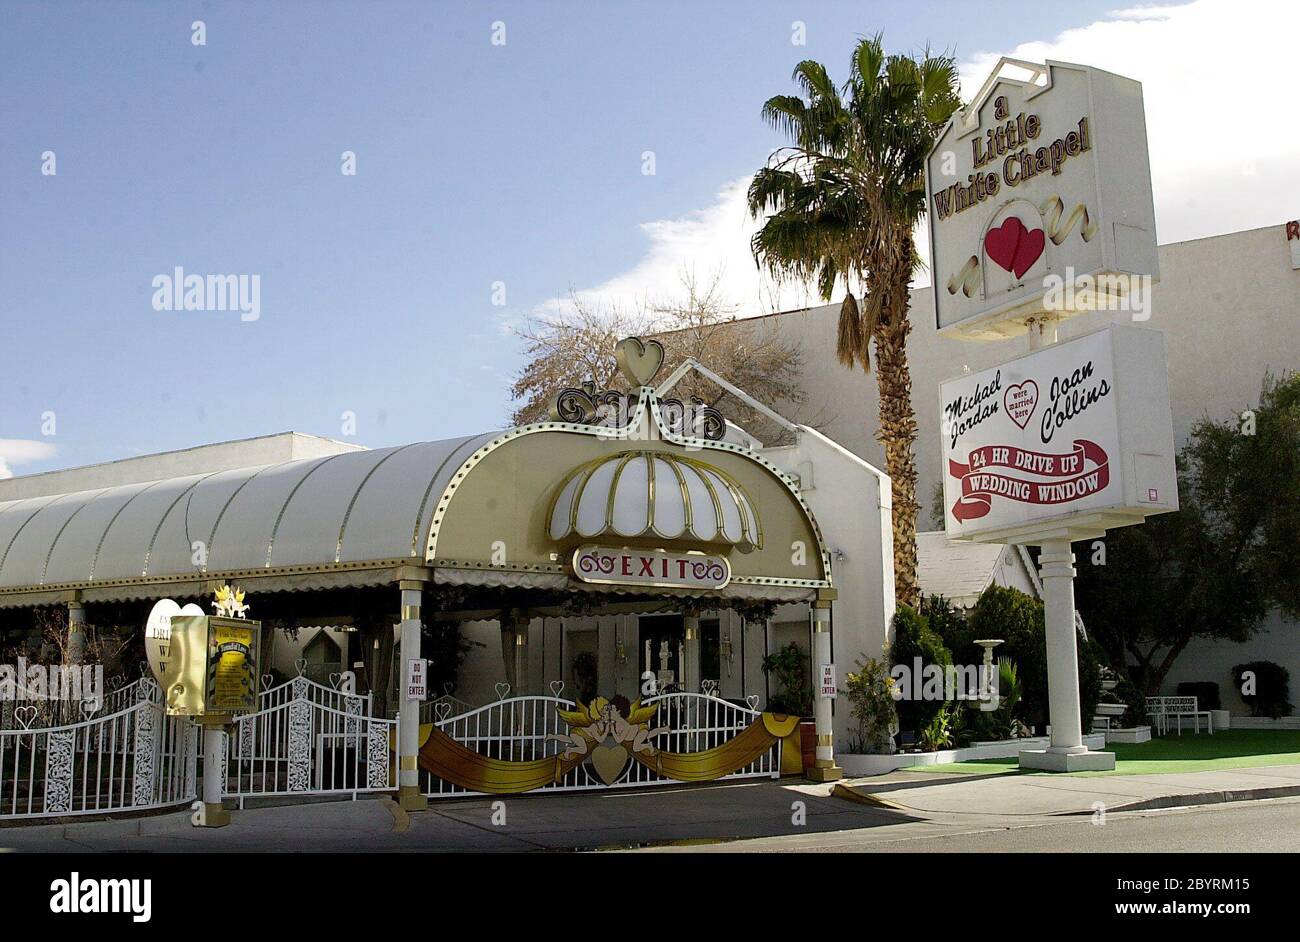 Wedding Chapel Las Vegsa 654 Hotel and most important places in Las Vegas The most beautiful place in Las Vegas Stock Photo